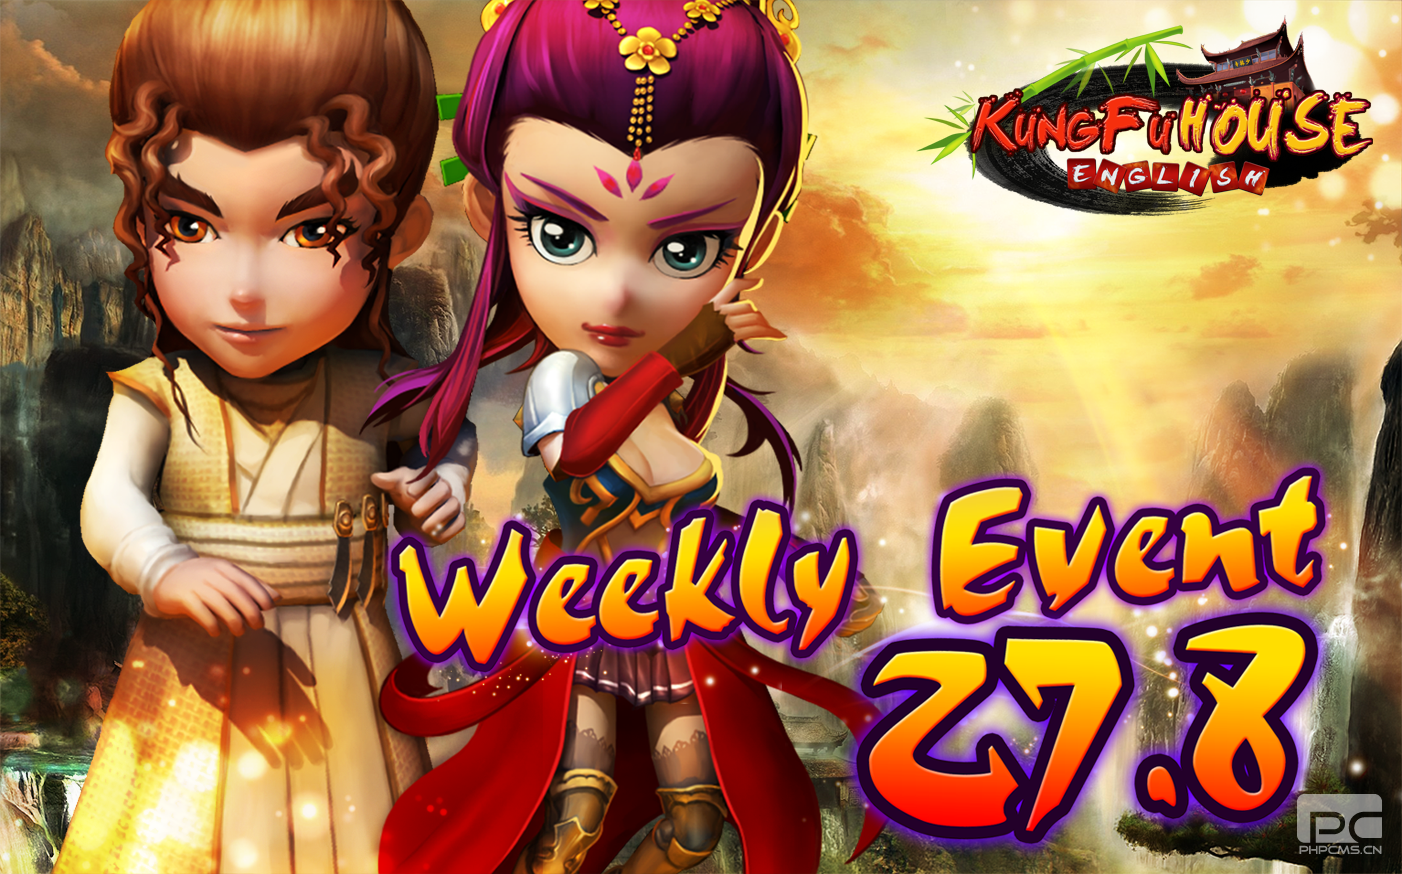 Weekly Event 27/8/2014